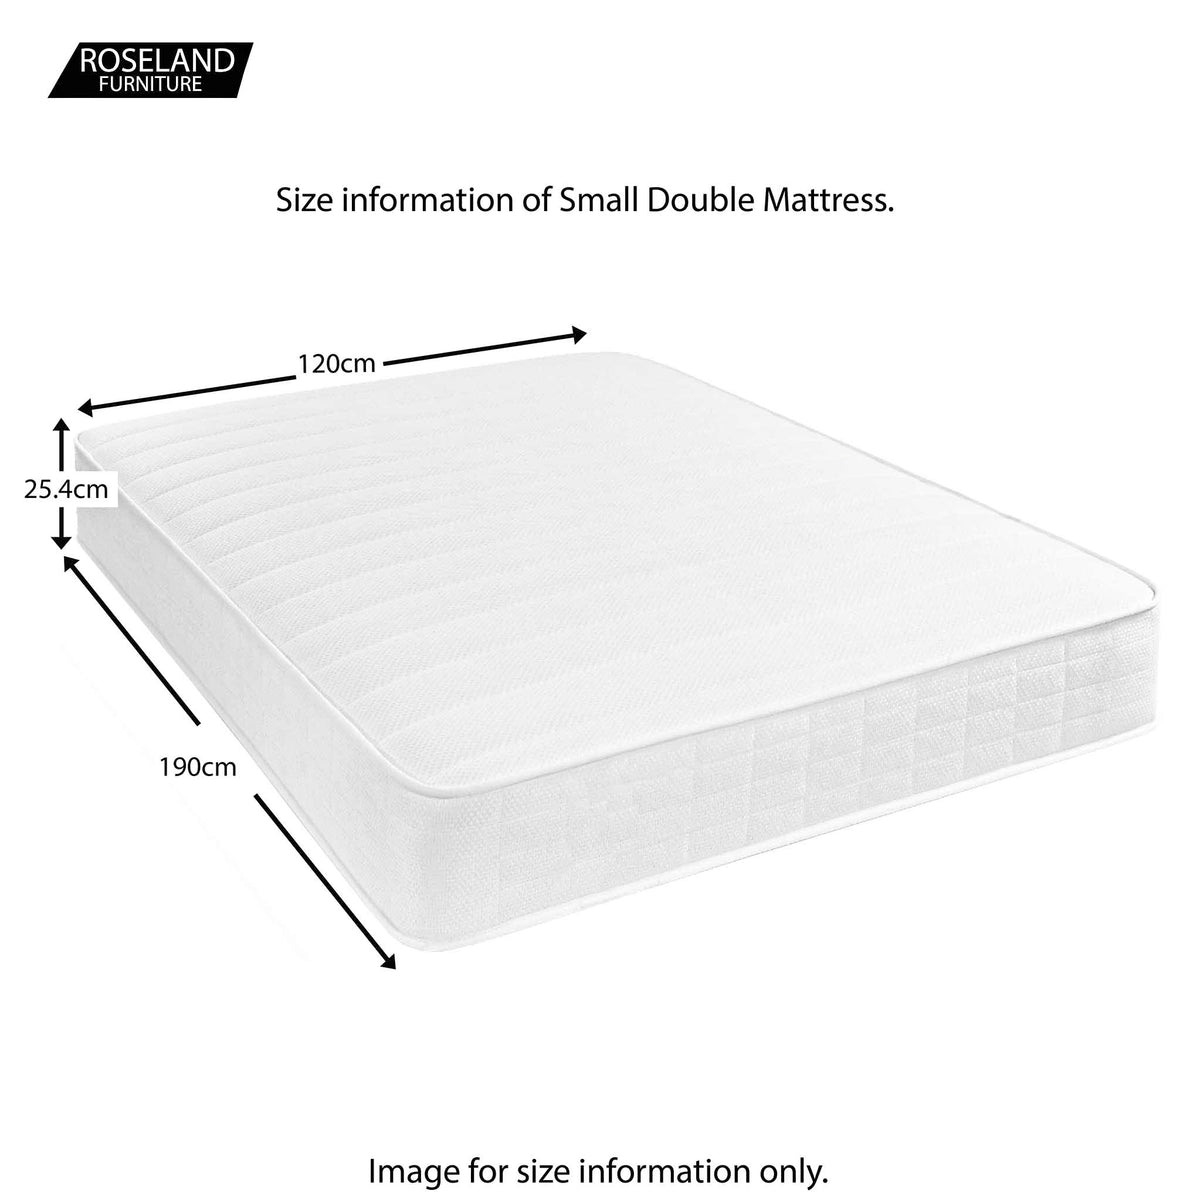 Roseland Sleep Tempest - Small Double Size Guide